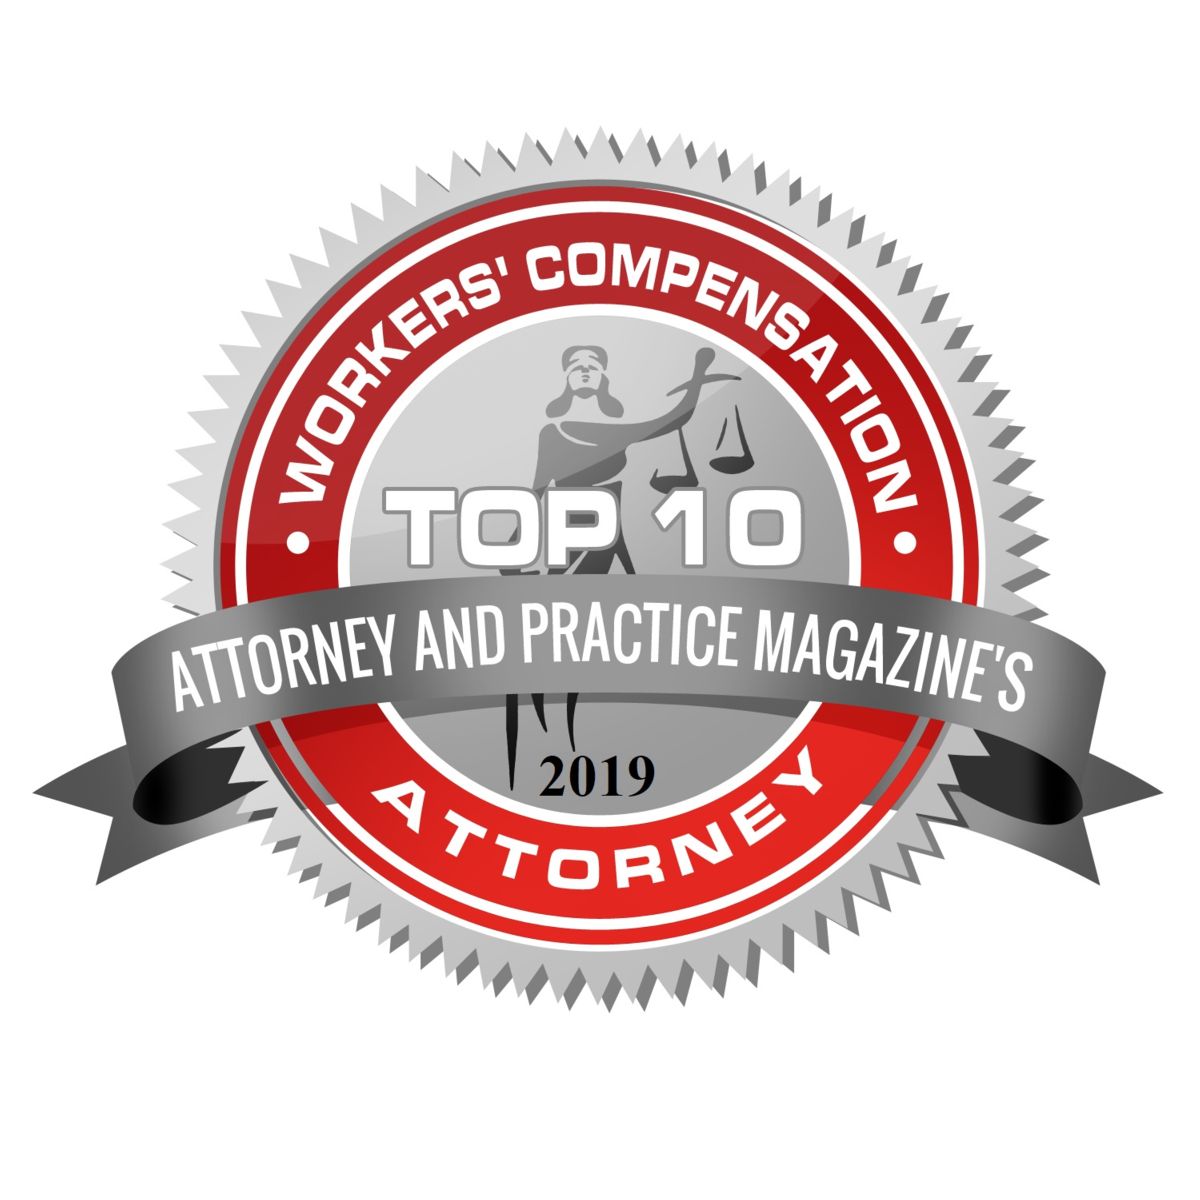 Workers' Compensation badge for Top 10 Attorneys